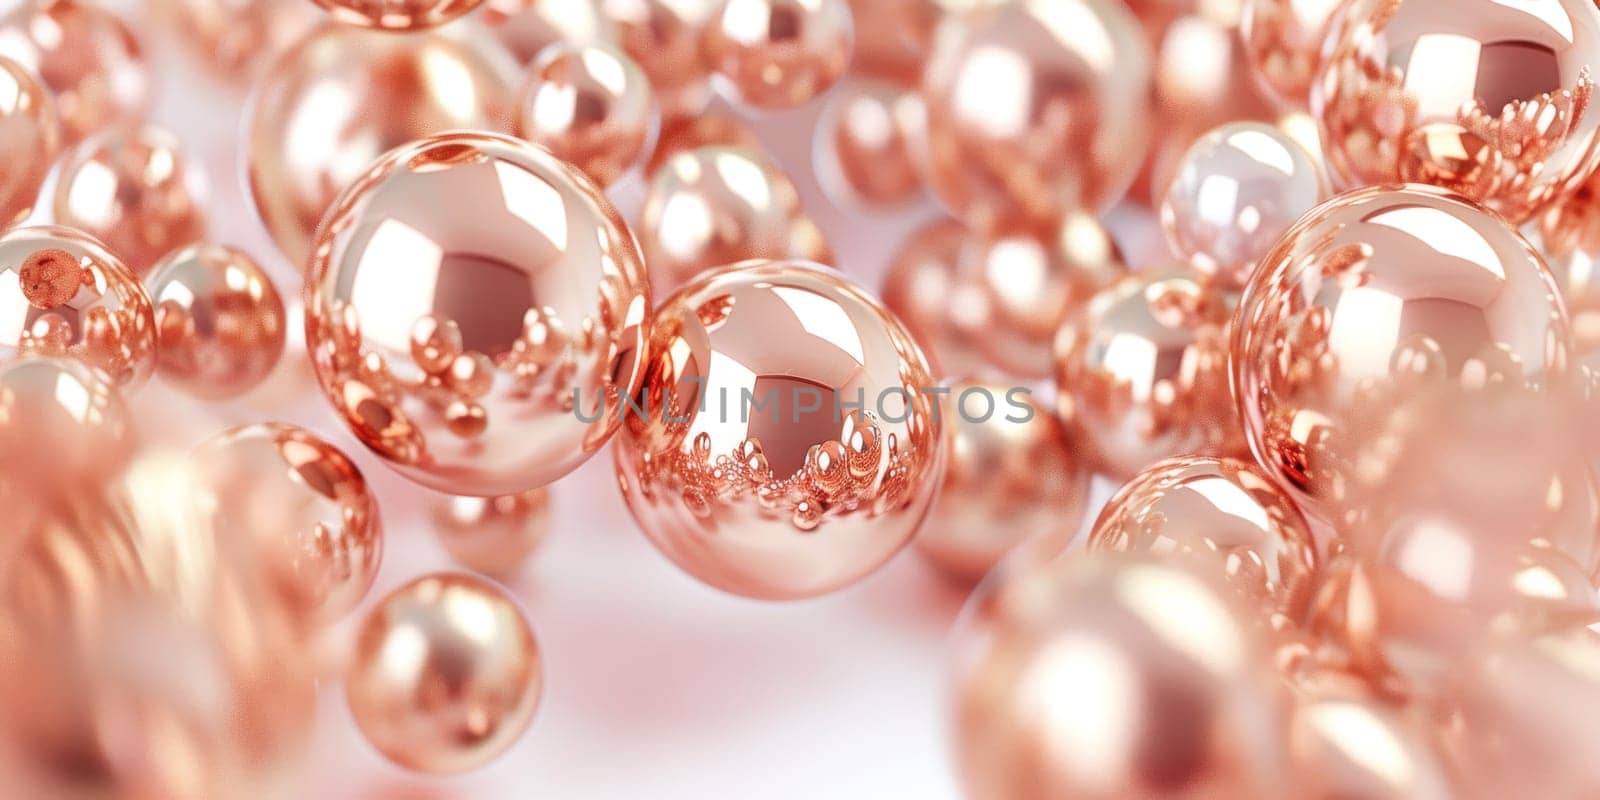 Shiny copper balls arranged on white surface with many balls in the air for art and design concept